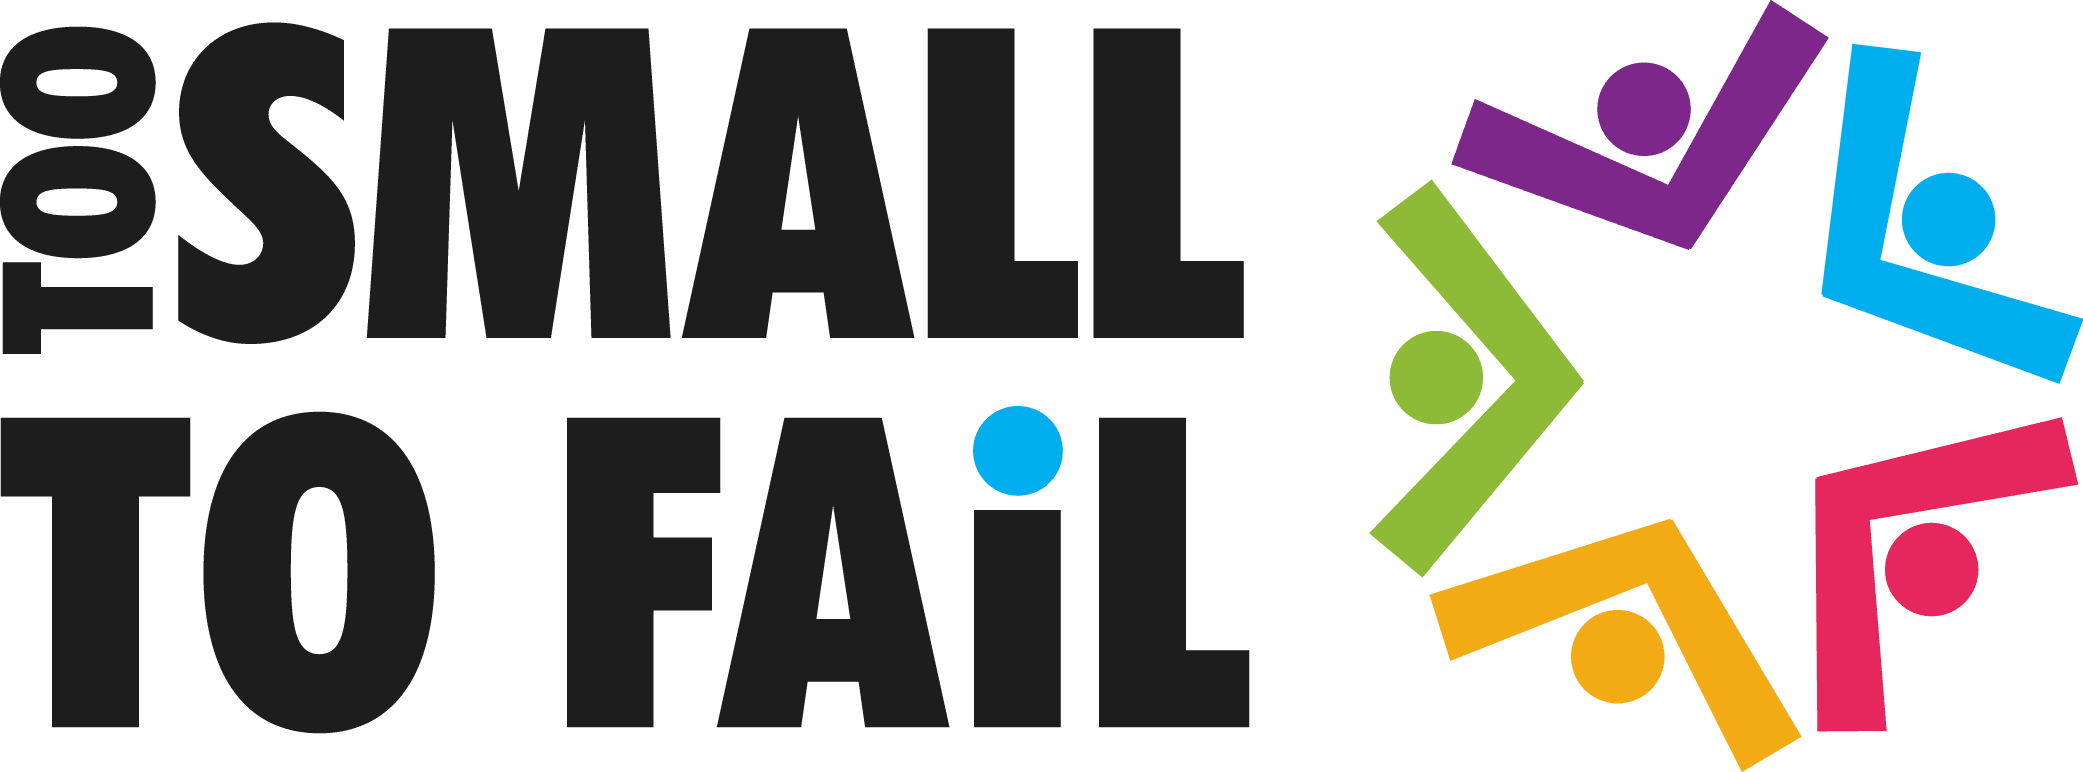 Too Small to Fail